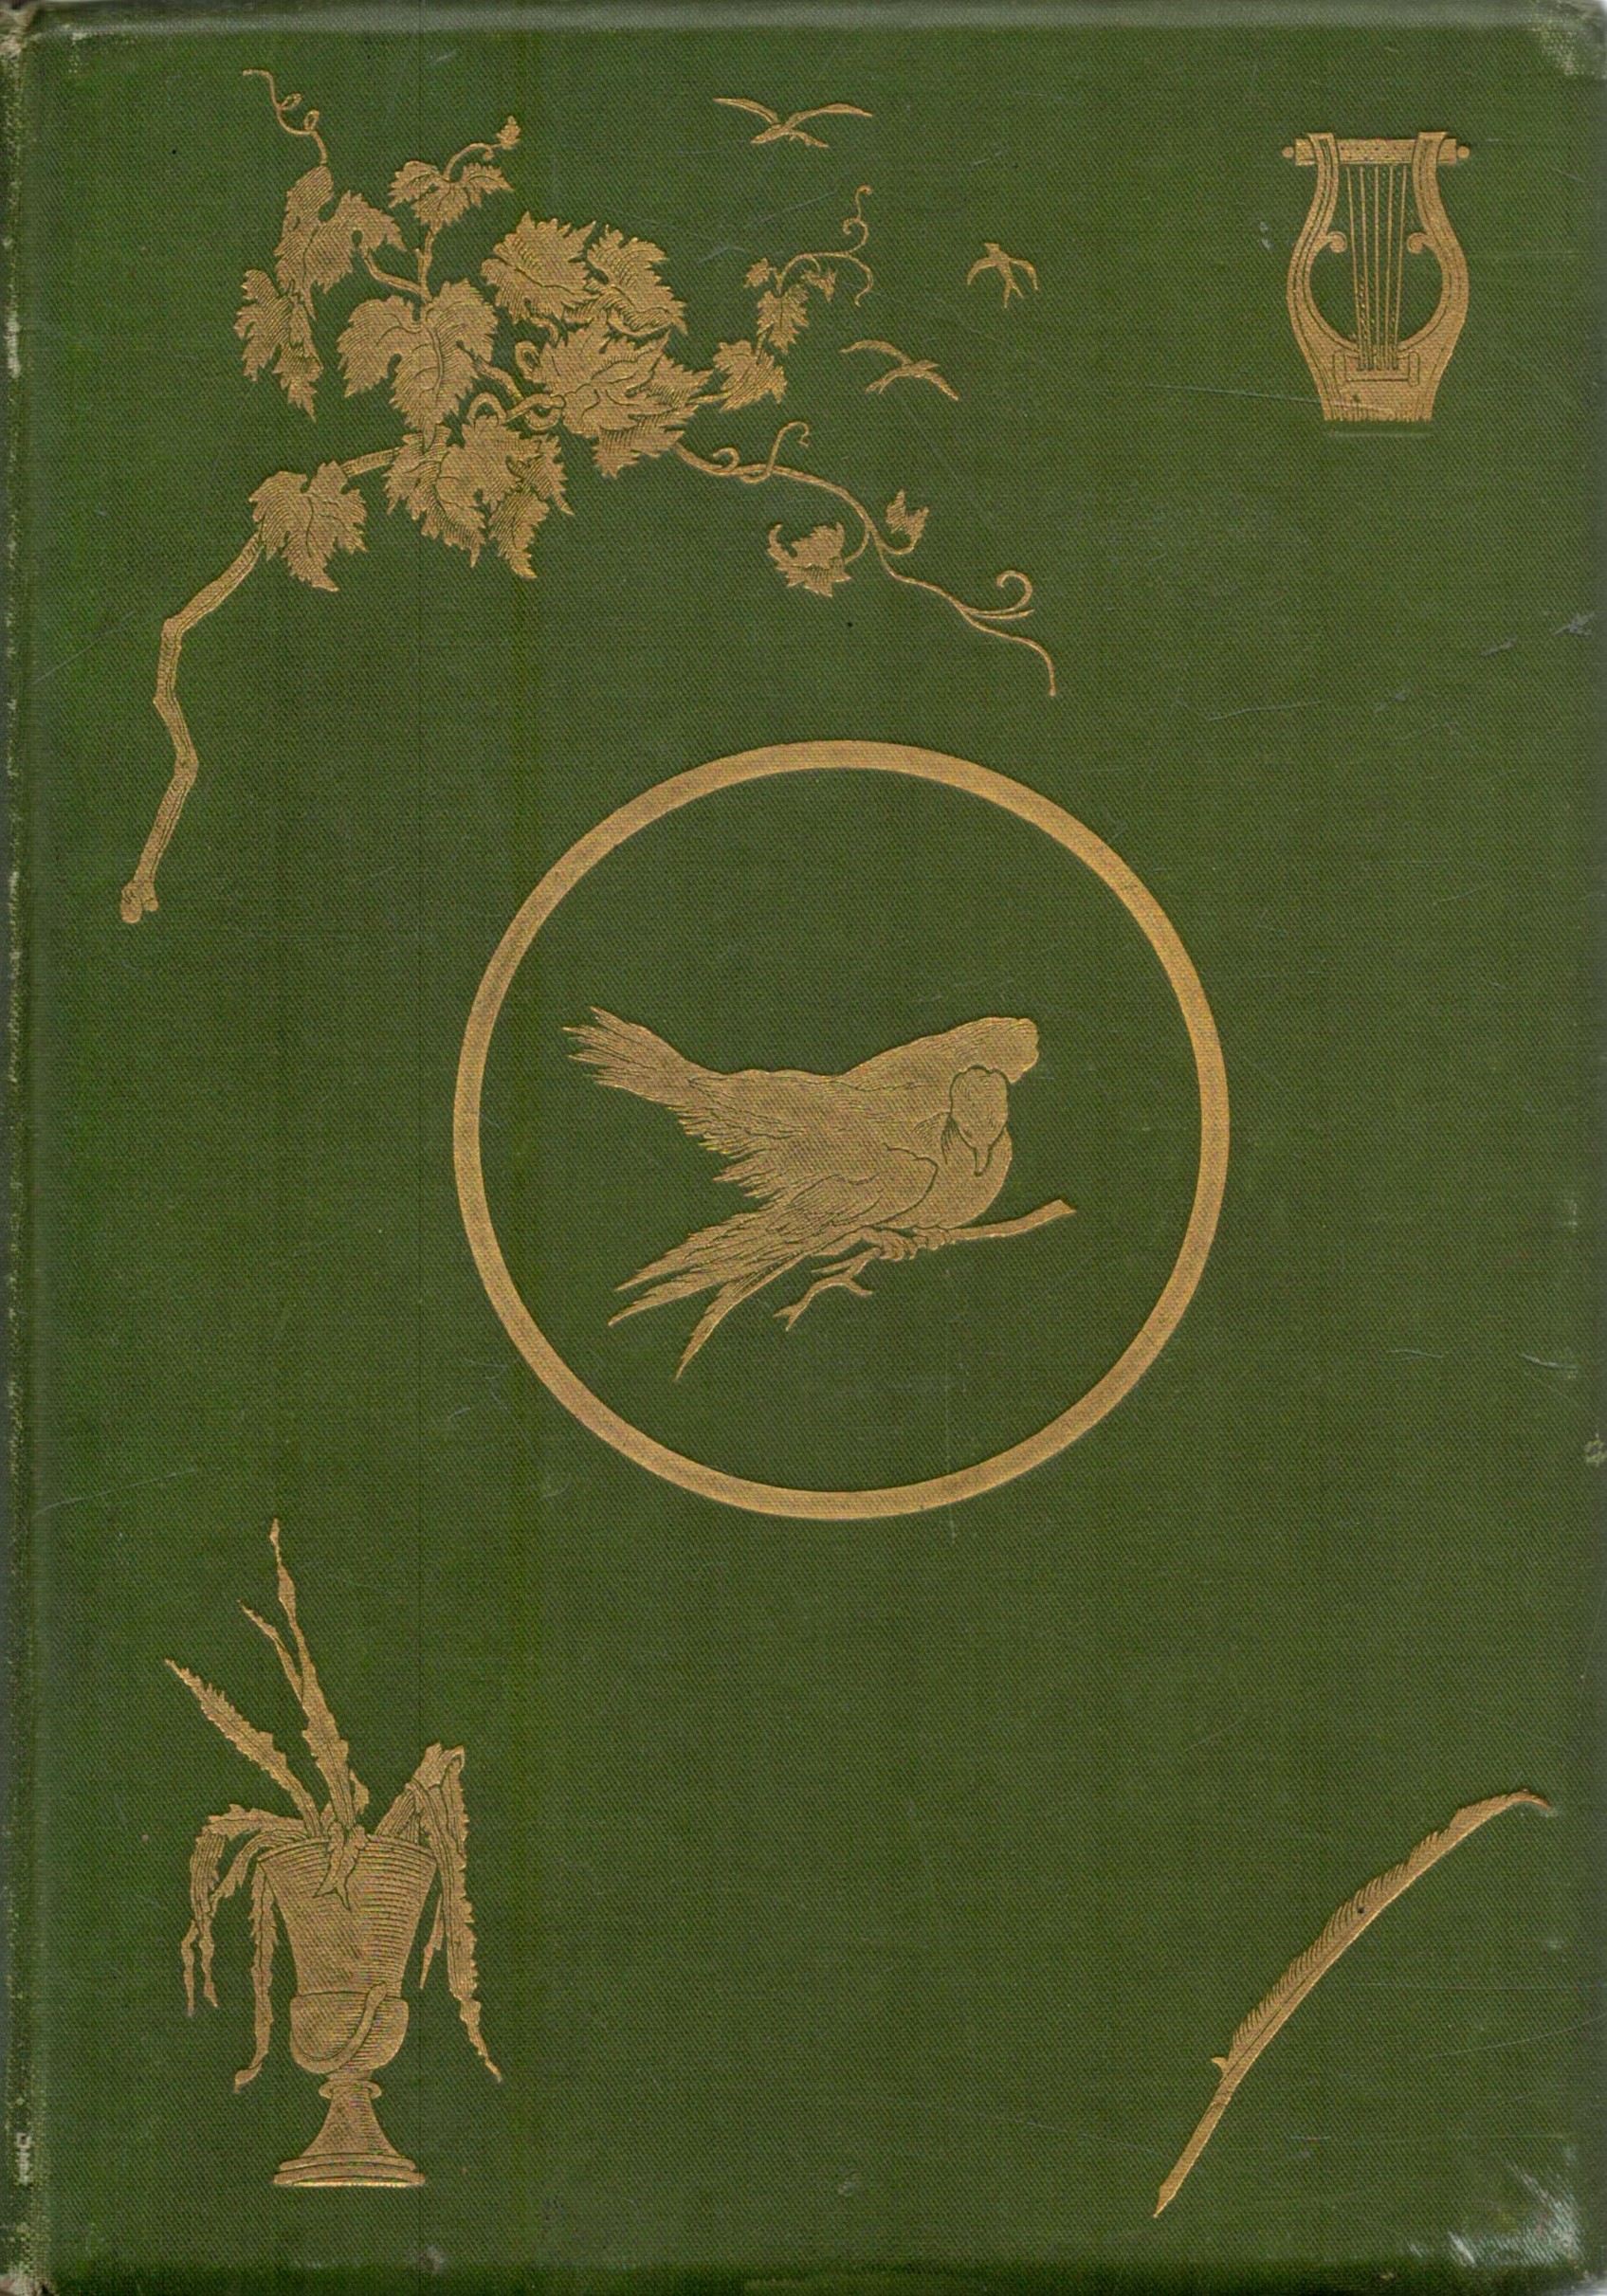 Preludes 1st Edition Hardback Book by A. C. Thompson. Published in 1875 by Henry S King and CO. 84